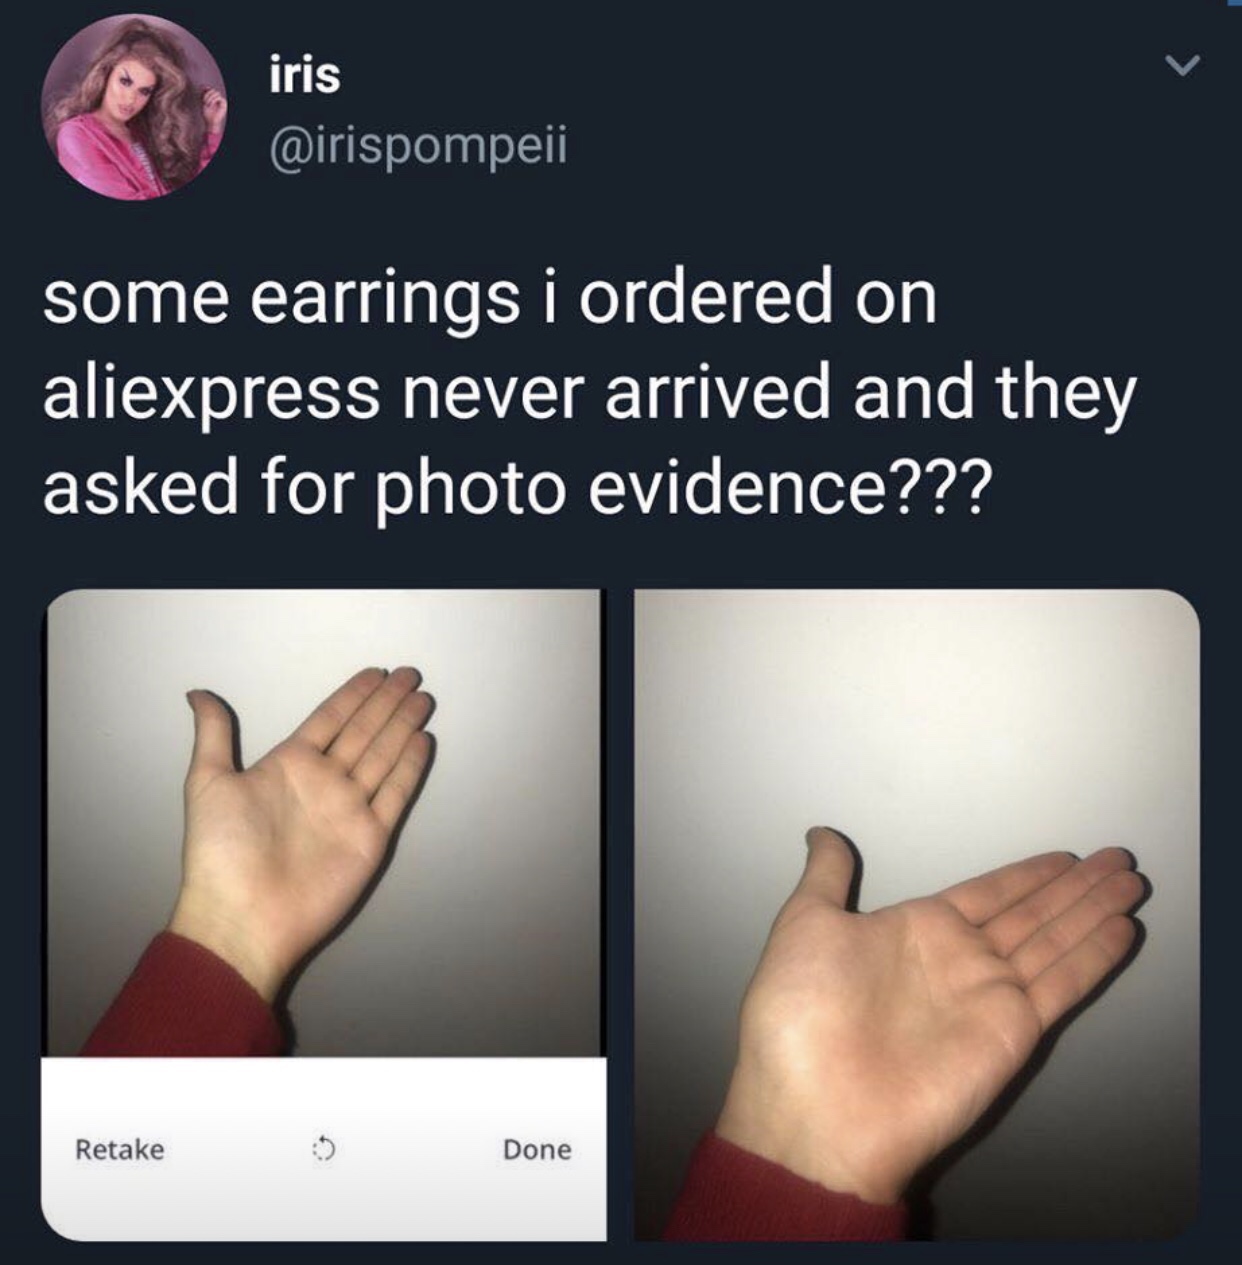 aliexpress meme evidence - iris some earrings i ordered on aliexpress never arrived and they asked for photo evidence??? Retake Done